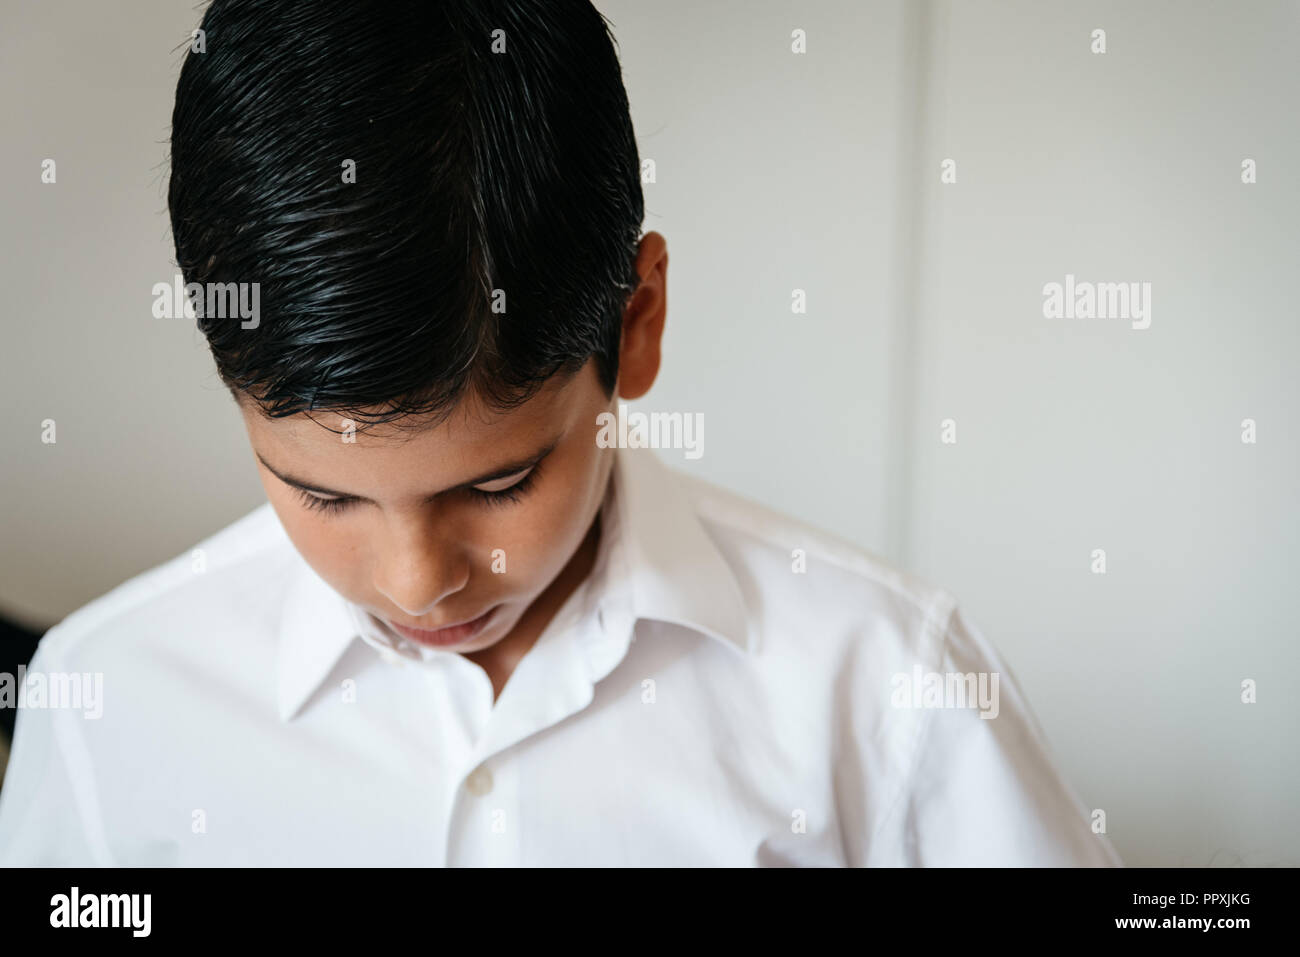 Young boy getting ready for celebration. He is looking down Stock Photo